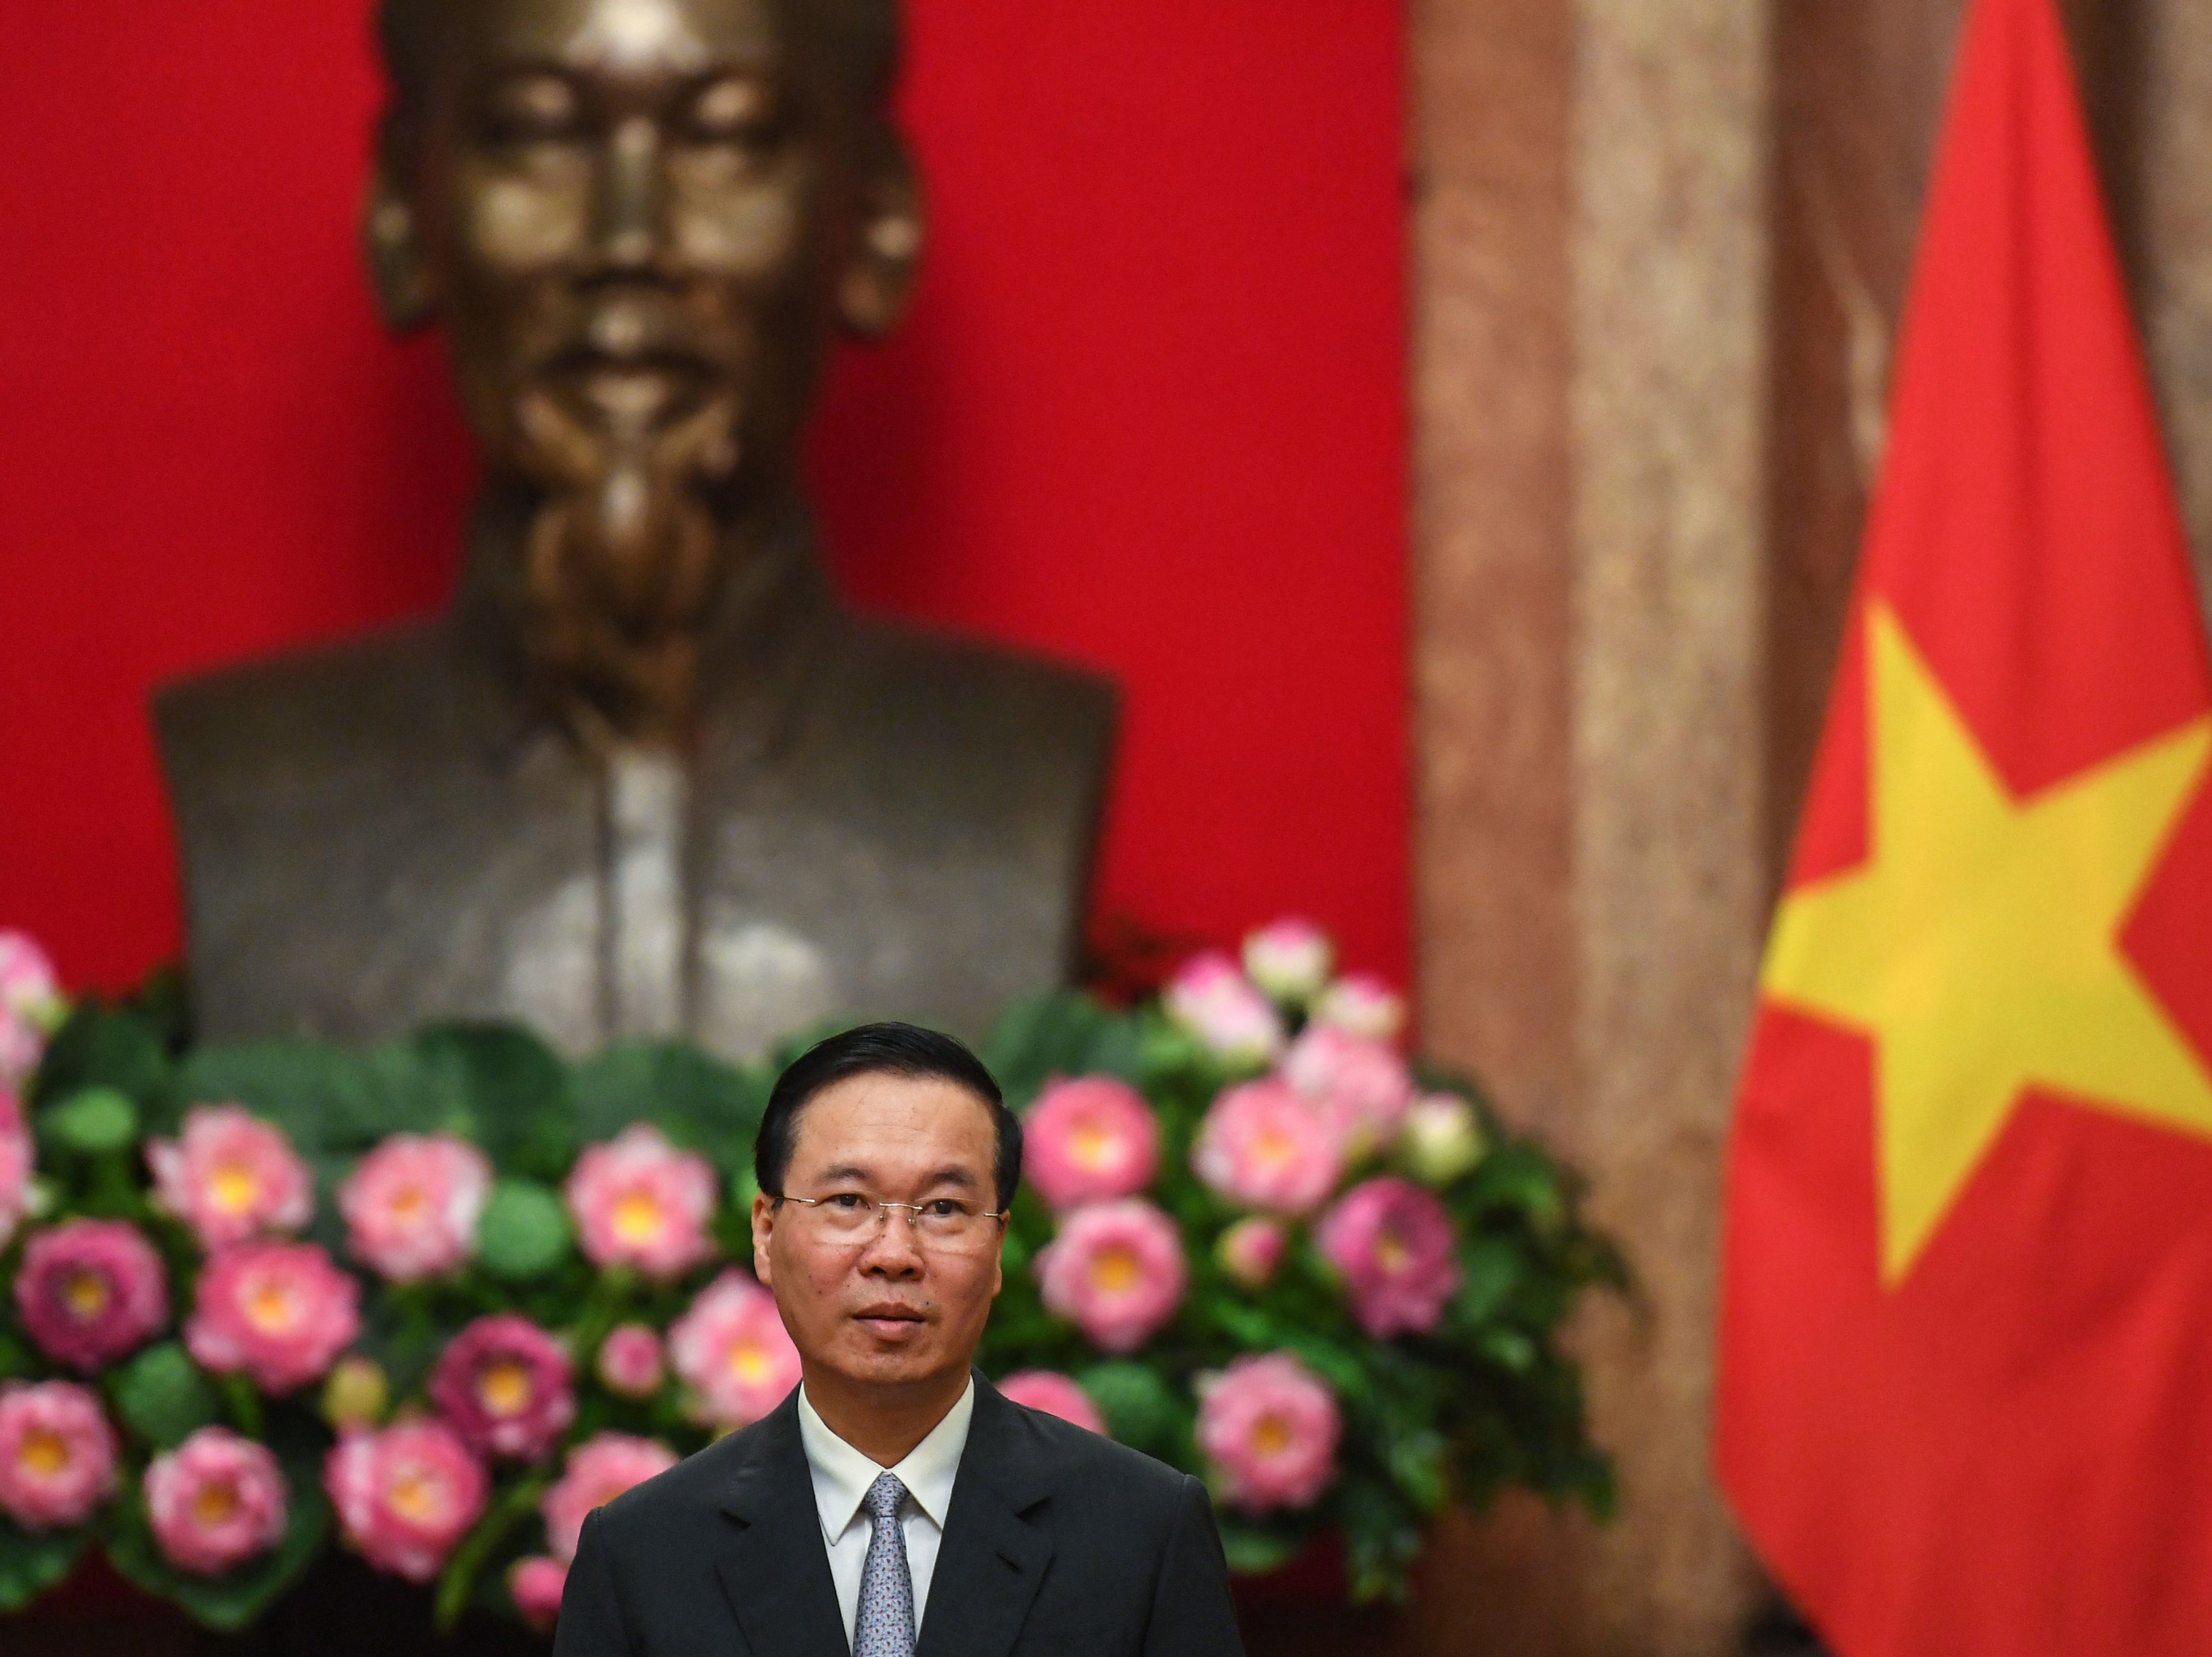 Vietnam’s president Vo Van Thuong looks on during a meeting